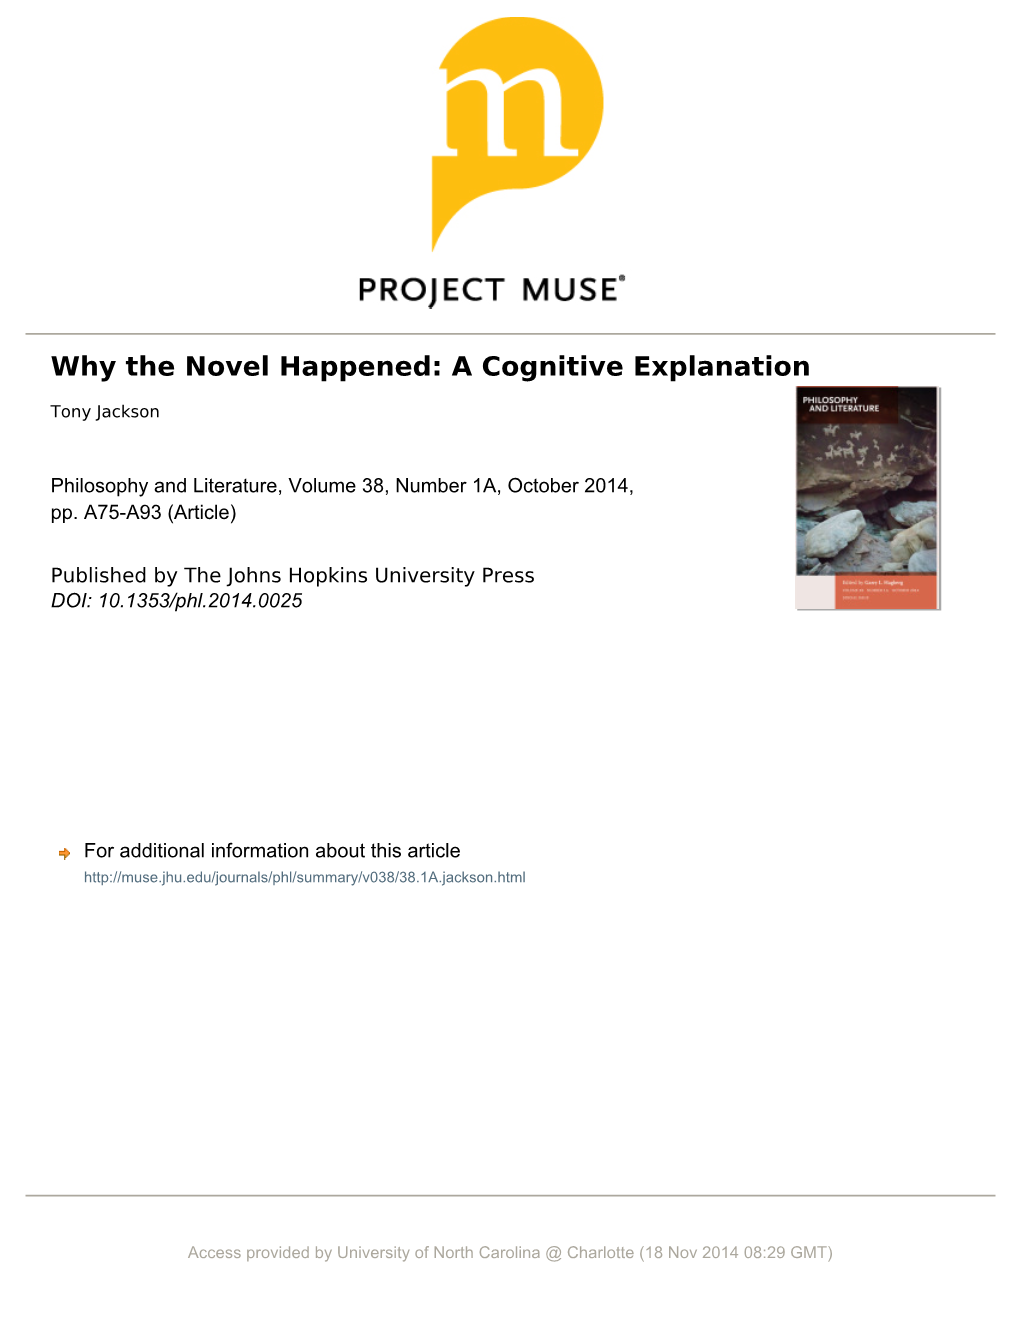 Why the Novel Happened: a Cognitive Explanation